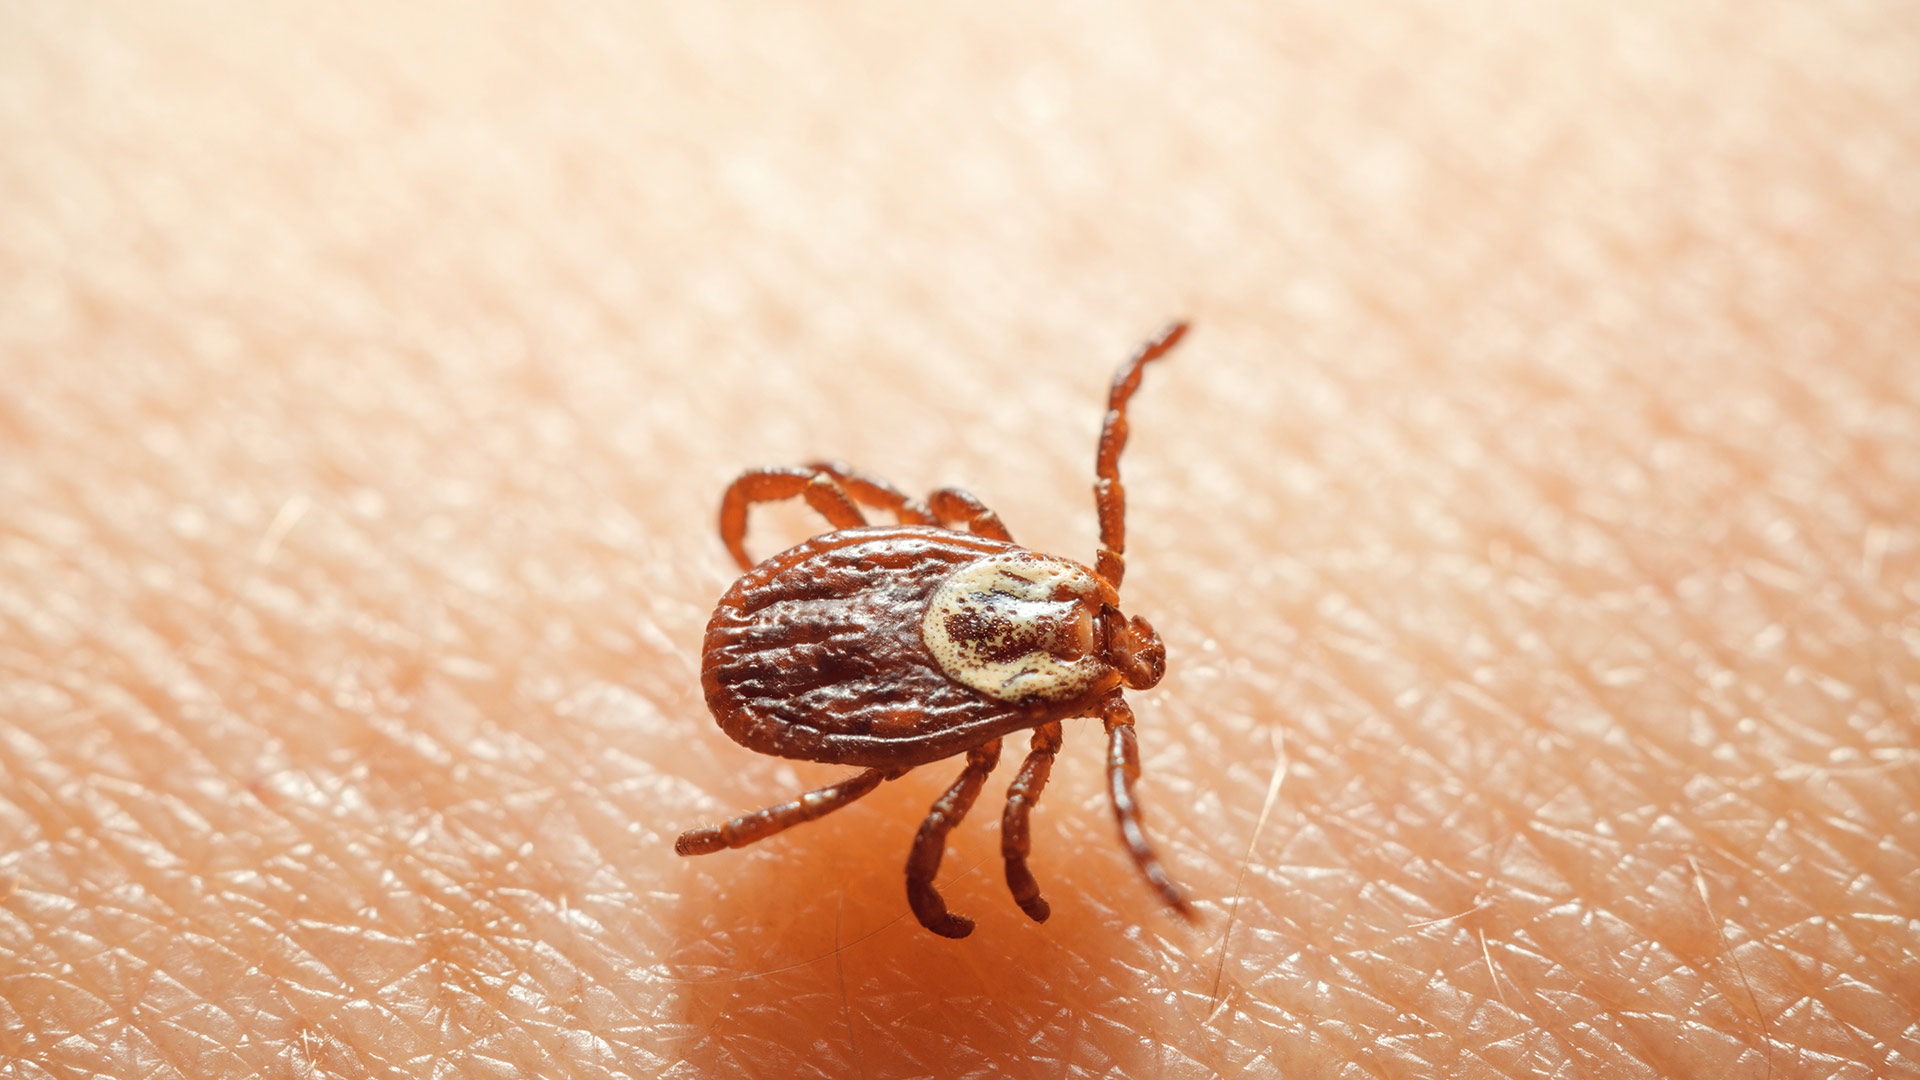 A tick crawling on a person's skin in Mankato, MN.